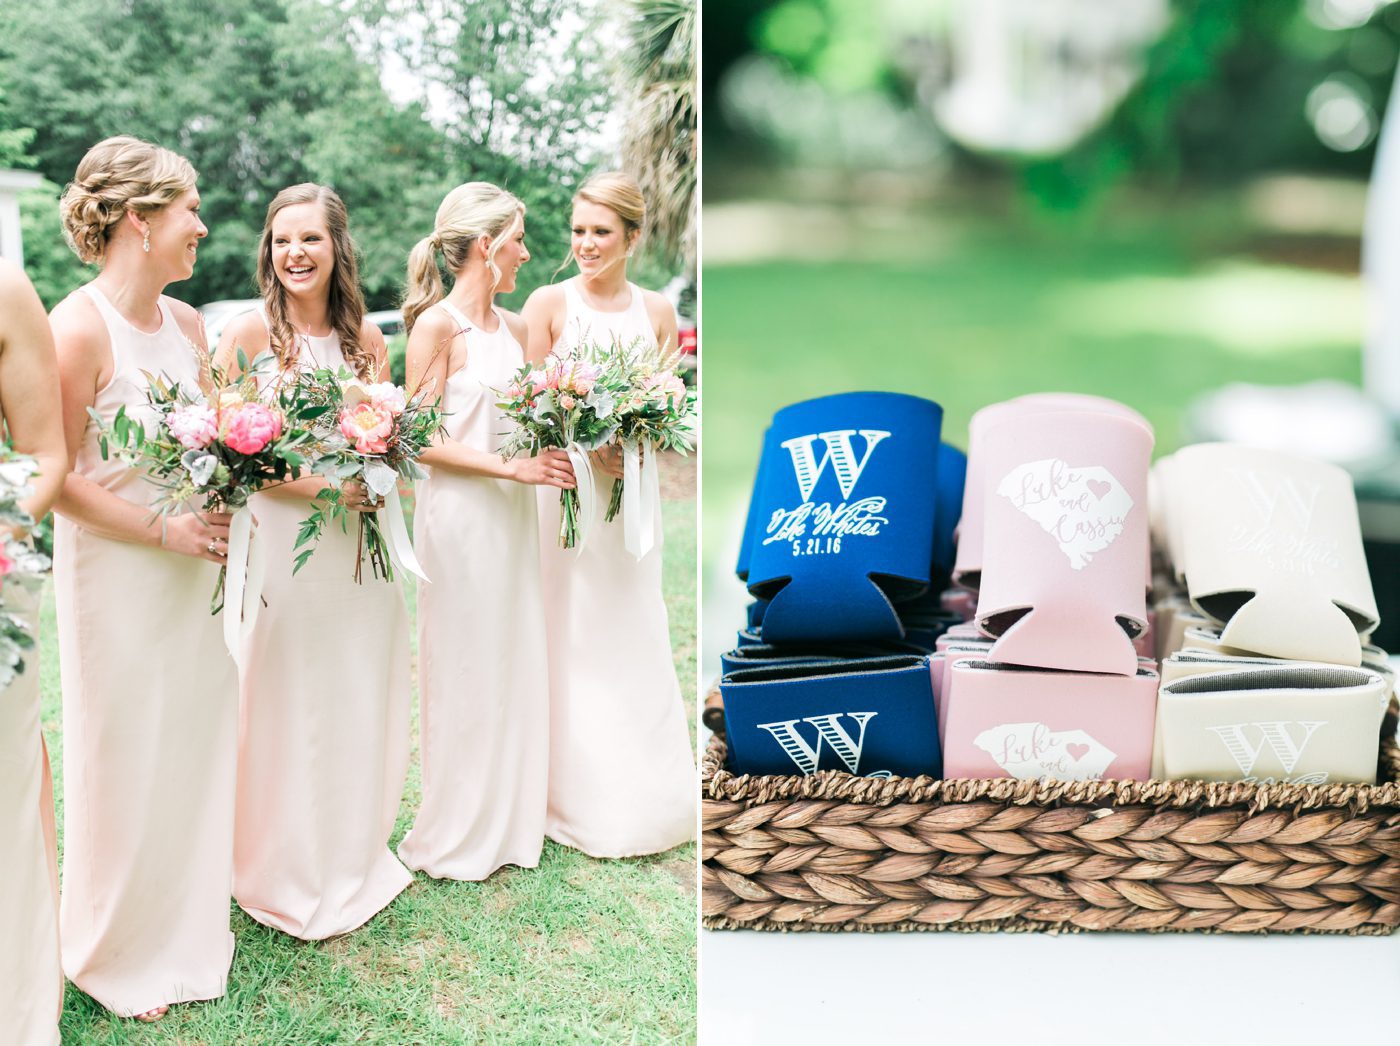 Southern wedding inspiration with pink bridesmaids dresses. Photo by Charleston wedding photographer Catherine Ann Photography